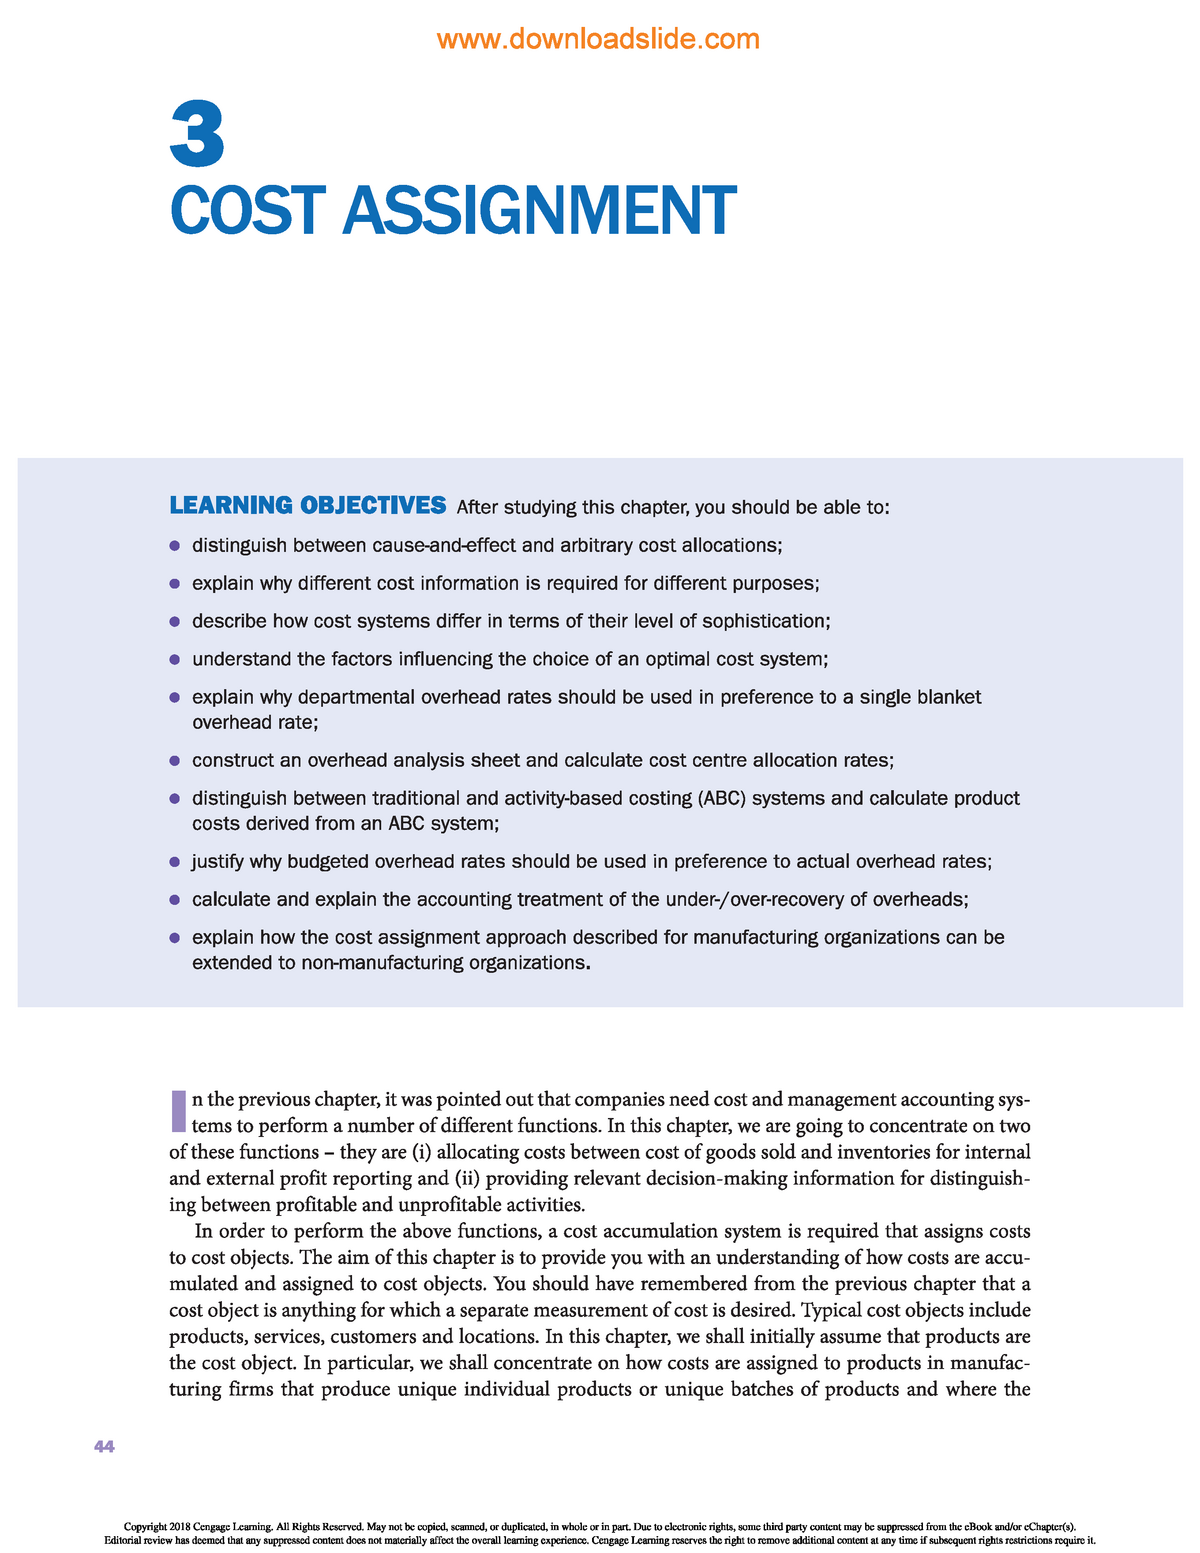 cost assignment techniques